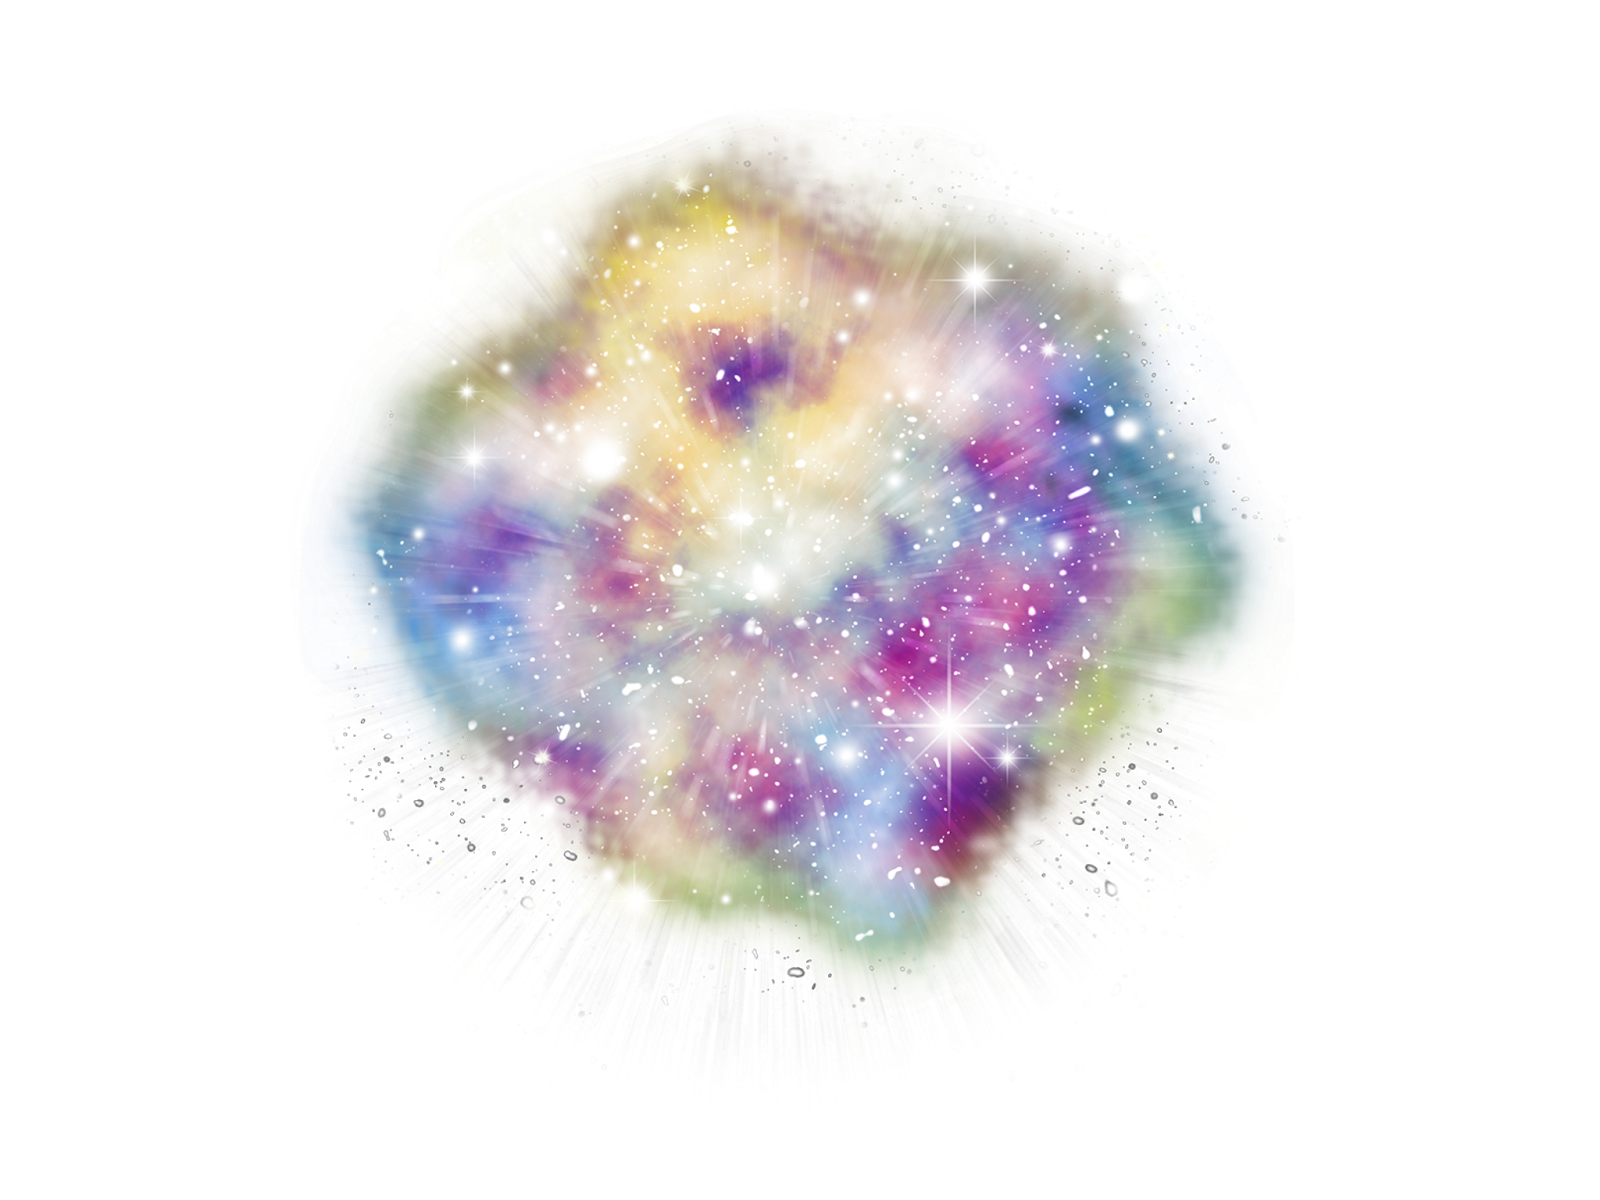 Photoshop &, Mobile Editing: Stardust PNG . For Editors.